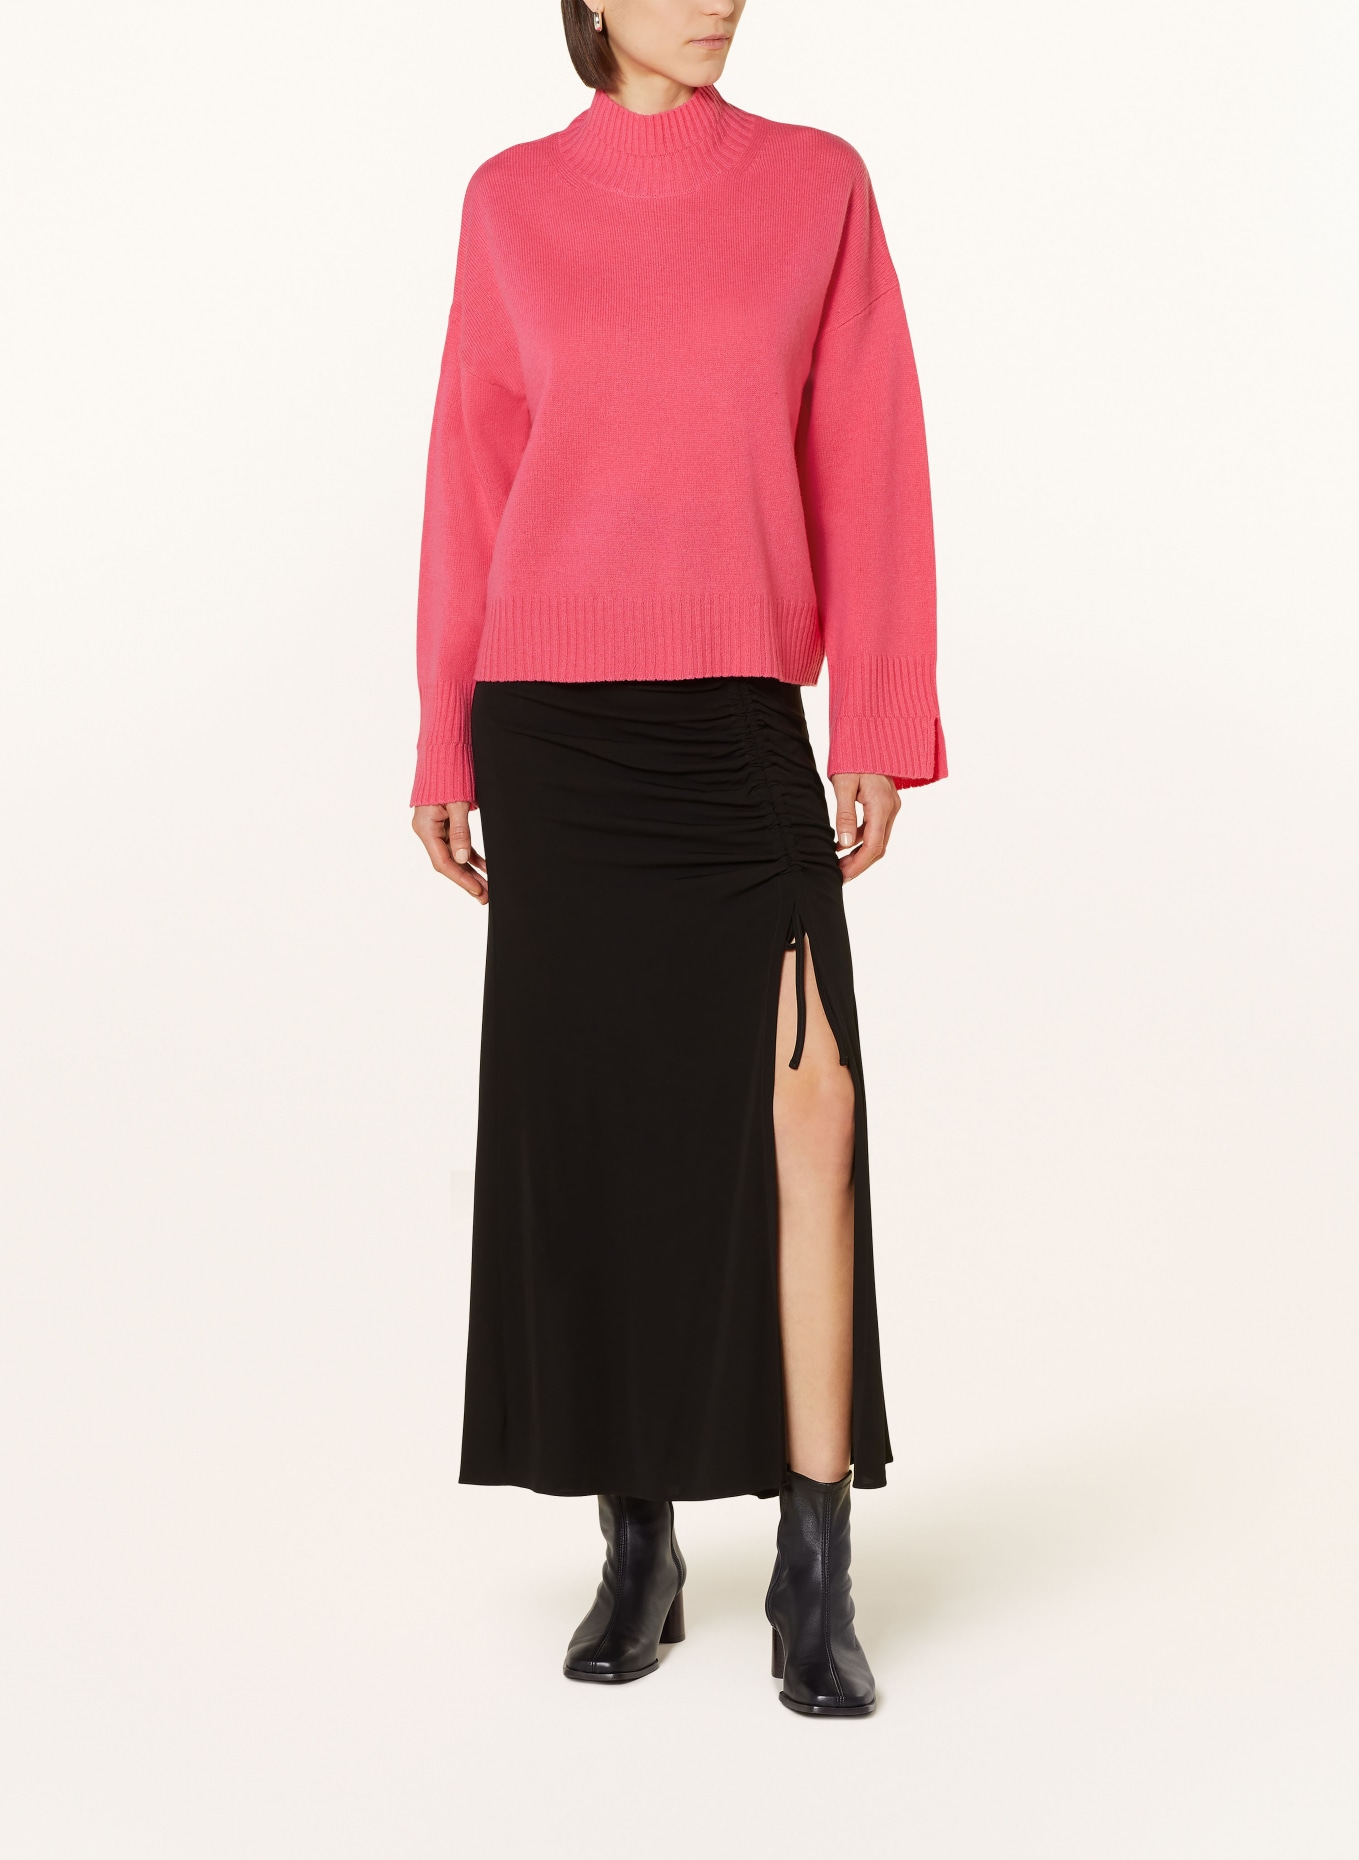 WHISTLES Pullover, Farbe: PINK (Bild 2)